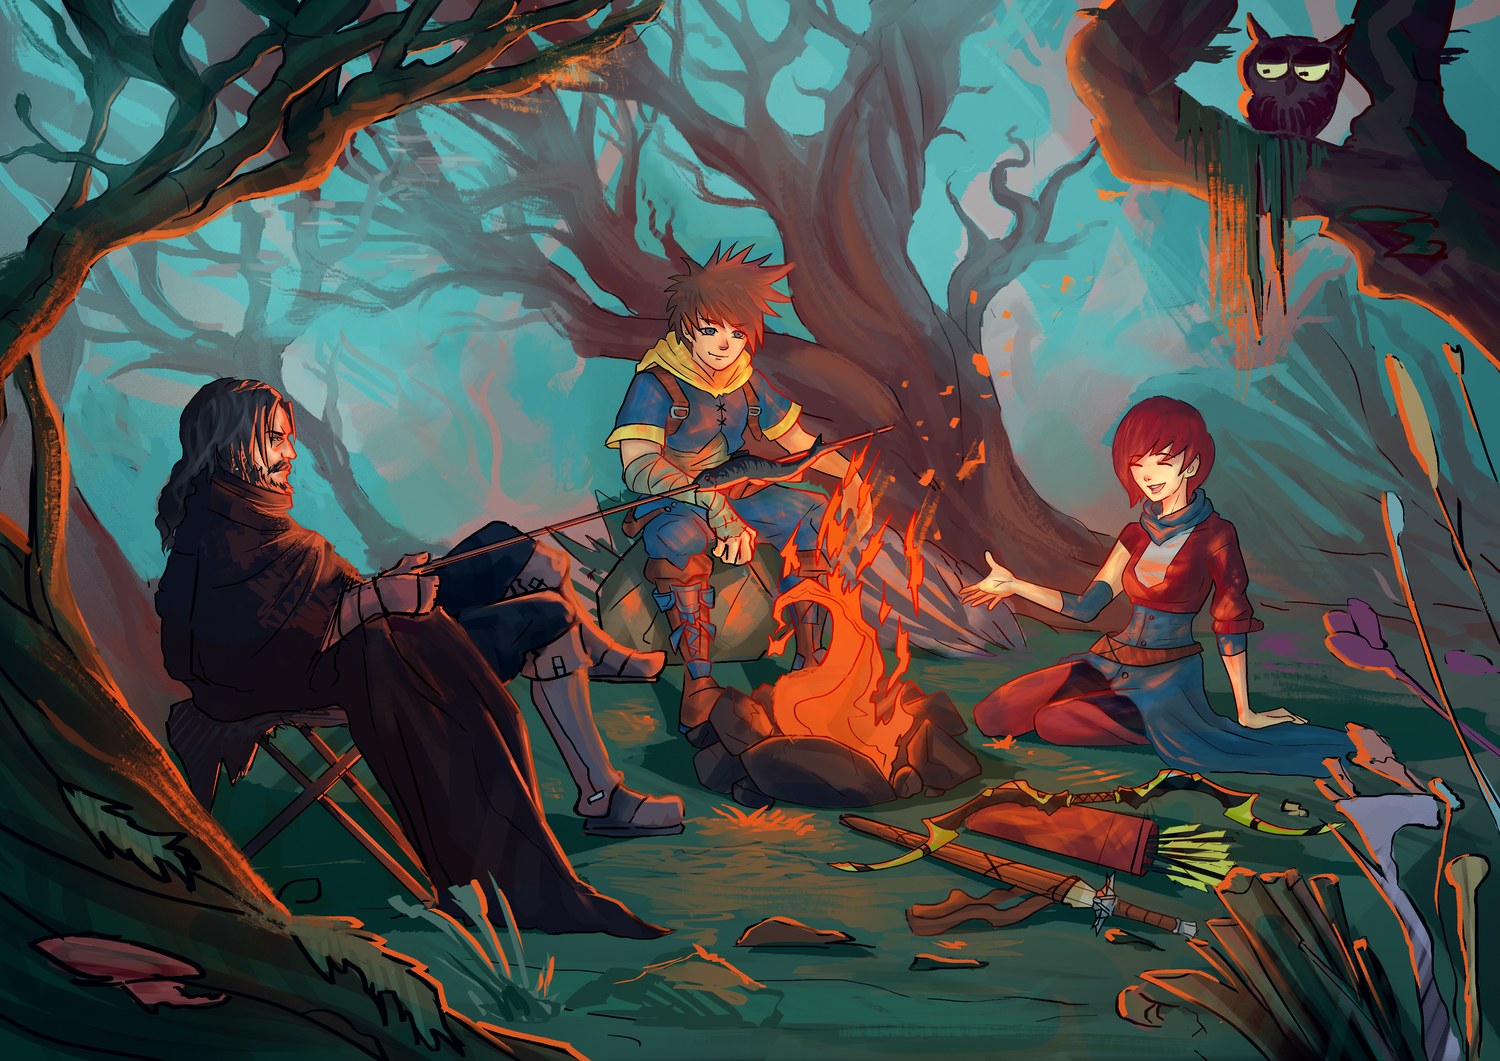 3 fantast characters sitting around a campfire talking. Weapons are spread across the grassy ground, with trees surrounding them